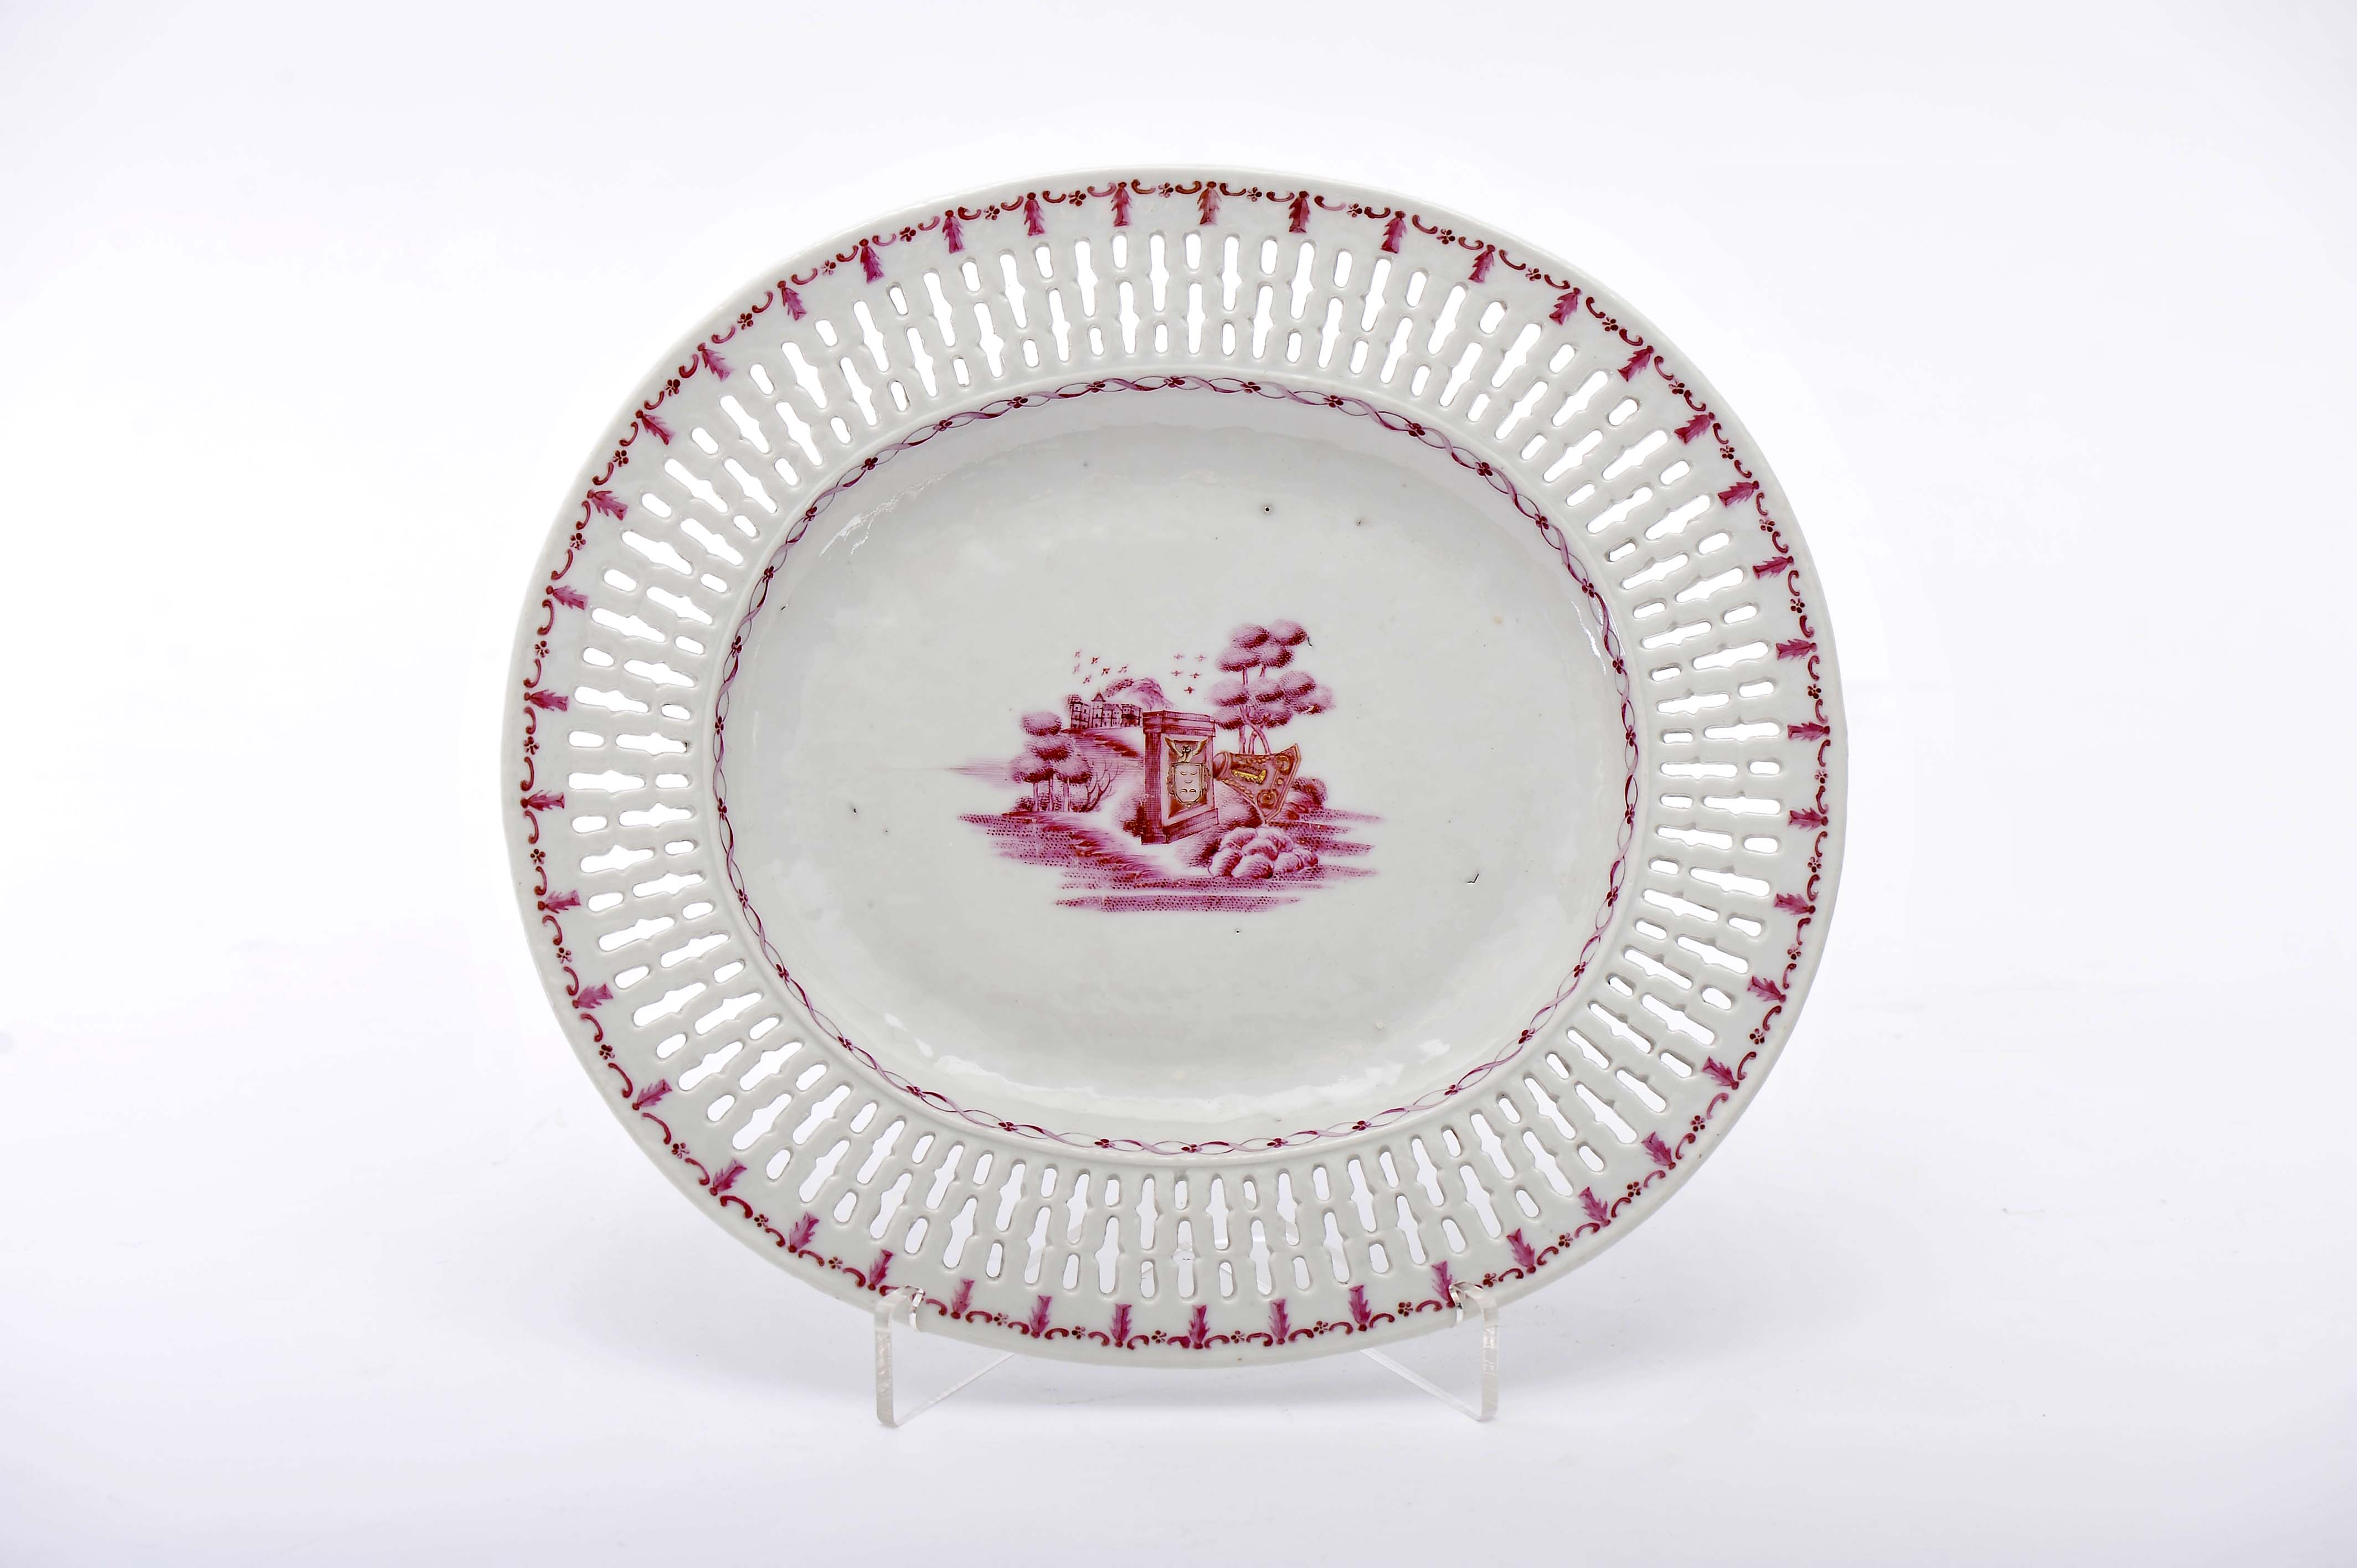 An Oval platter with lacy edge